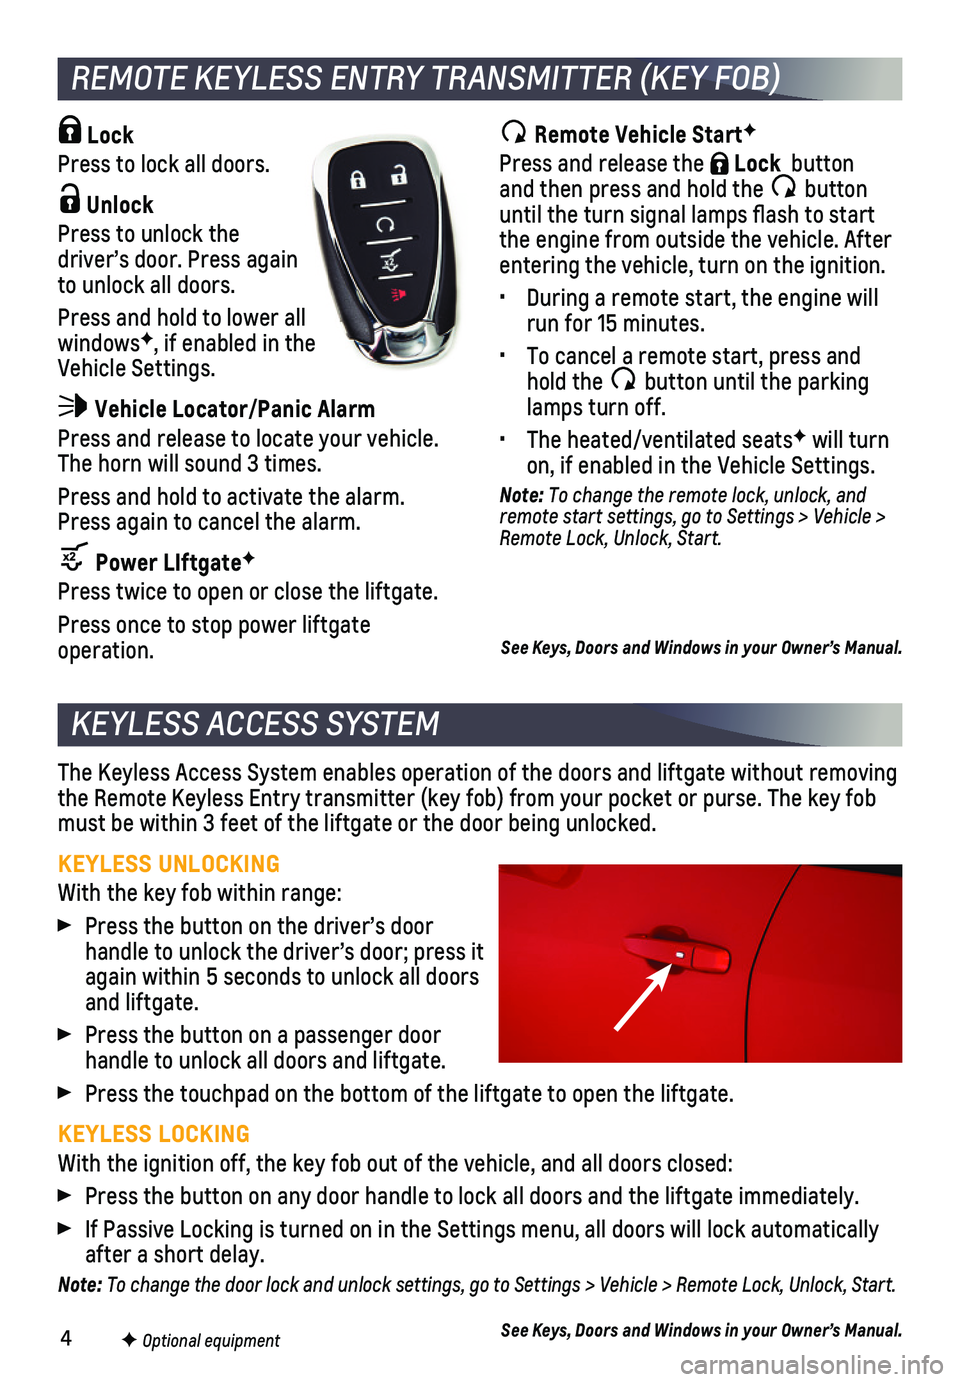 CHEVROLET BLAZER 2021  Get To Know Guide 4
KEYLESS ACCESS SYSTEM
The Keyless Access System enables operation of the doors and liftgate wi\
thout removing the Remote Keyless Entry transmitter (key fob) from your pocket or pur\
se. The key fob